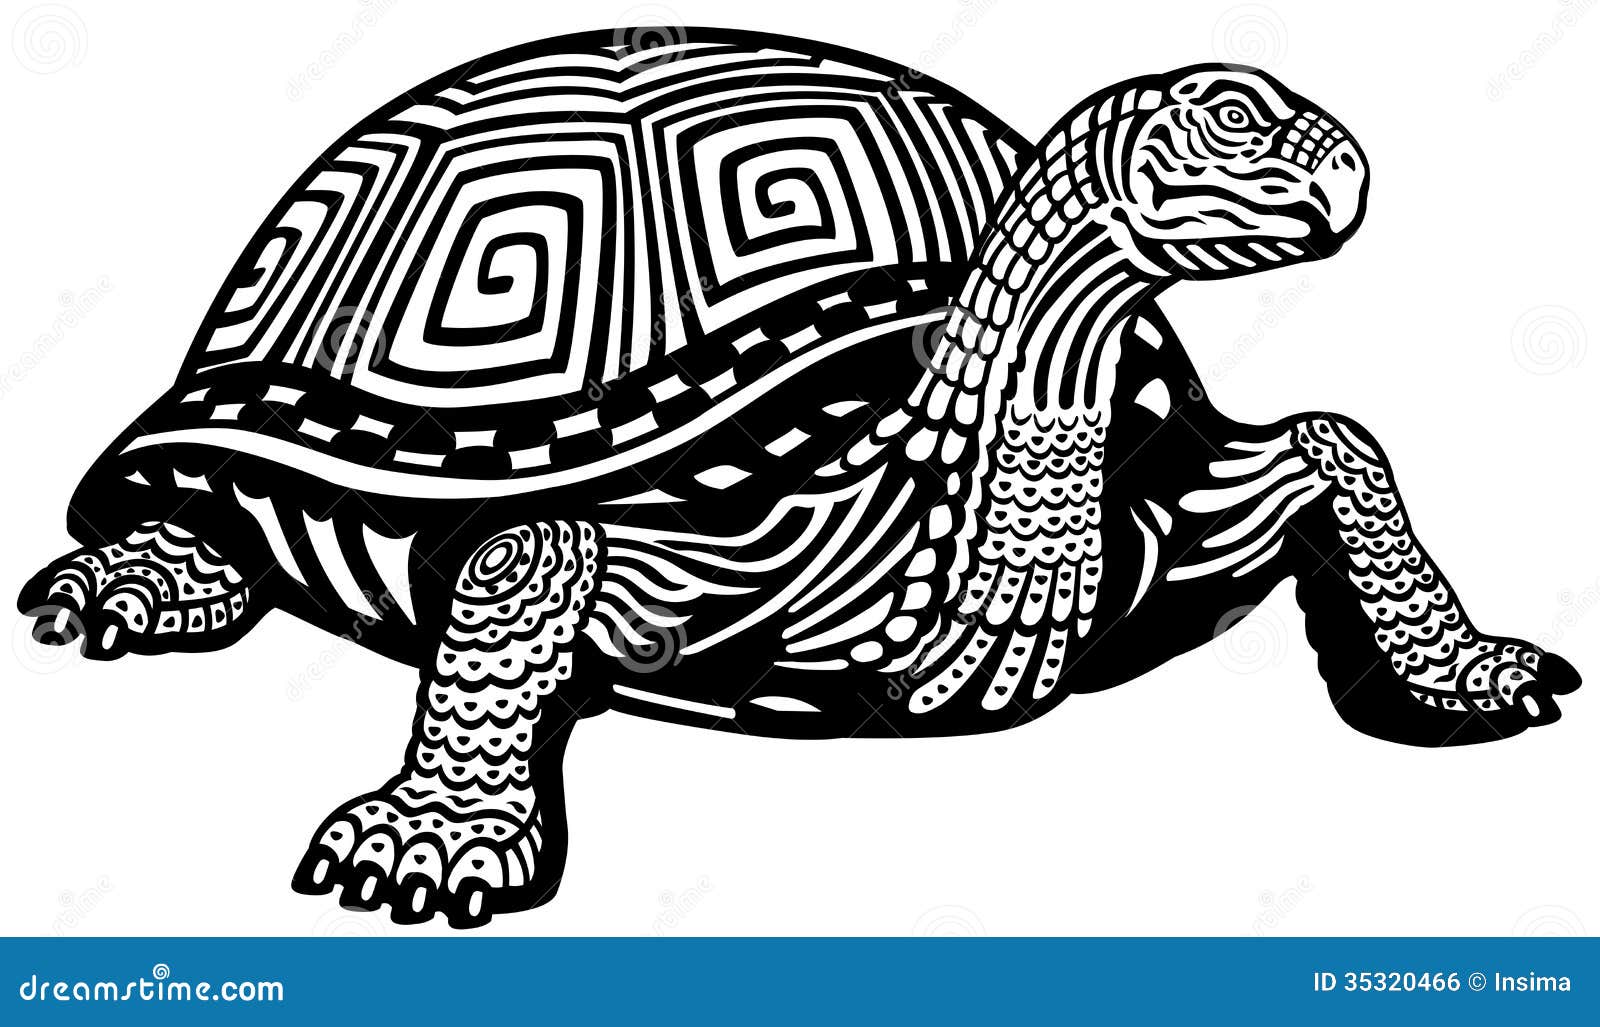 turtle clipart black and white - photo #32